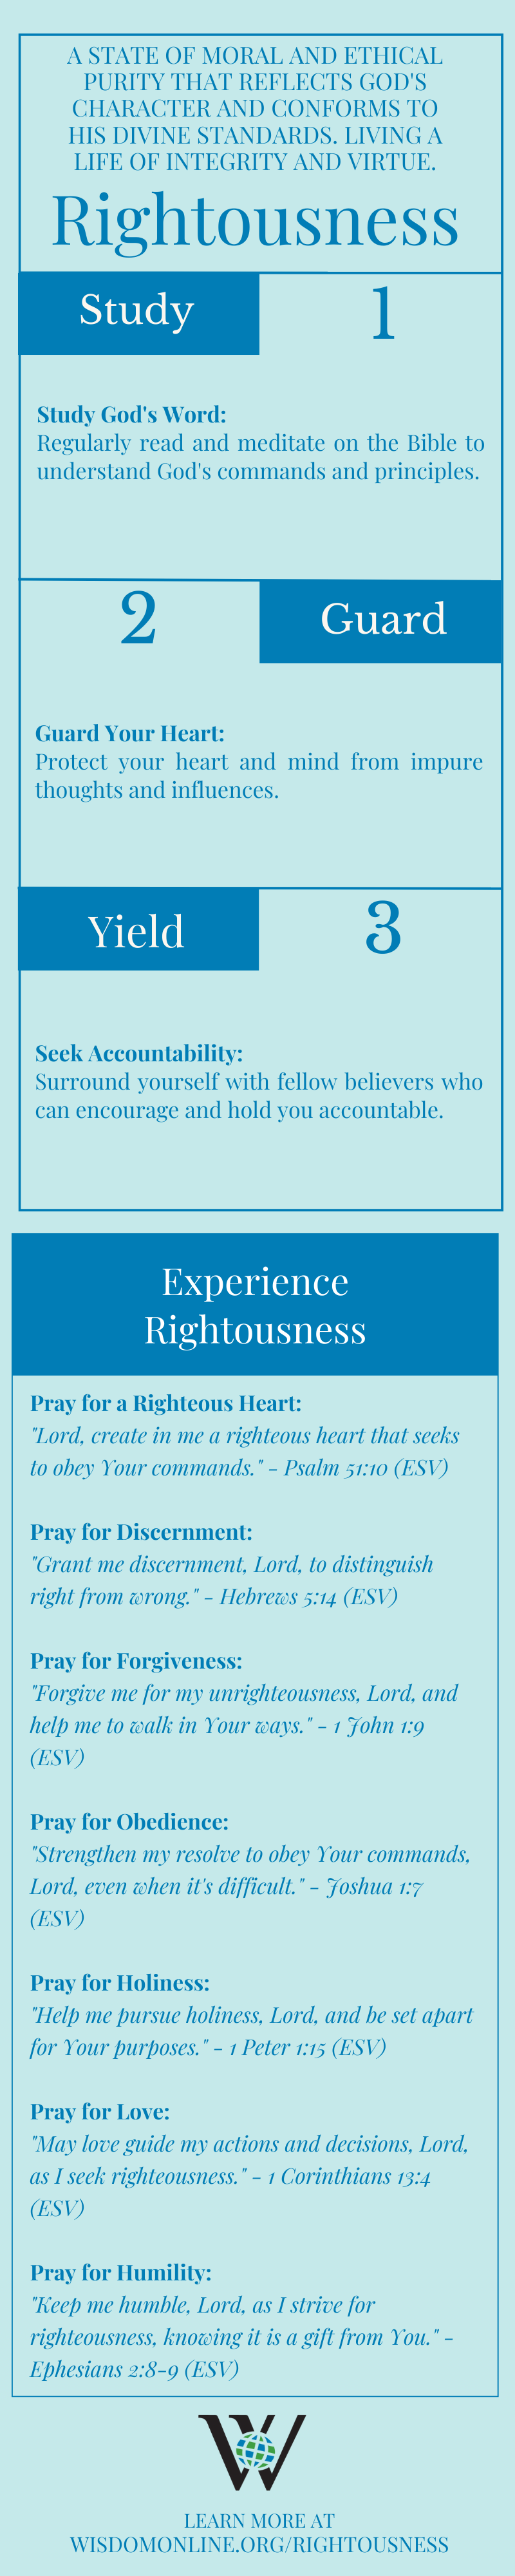 Infographic on the biblical quality of rightousness.